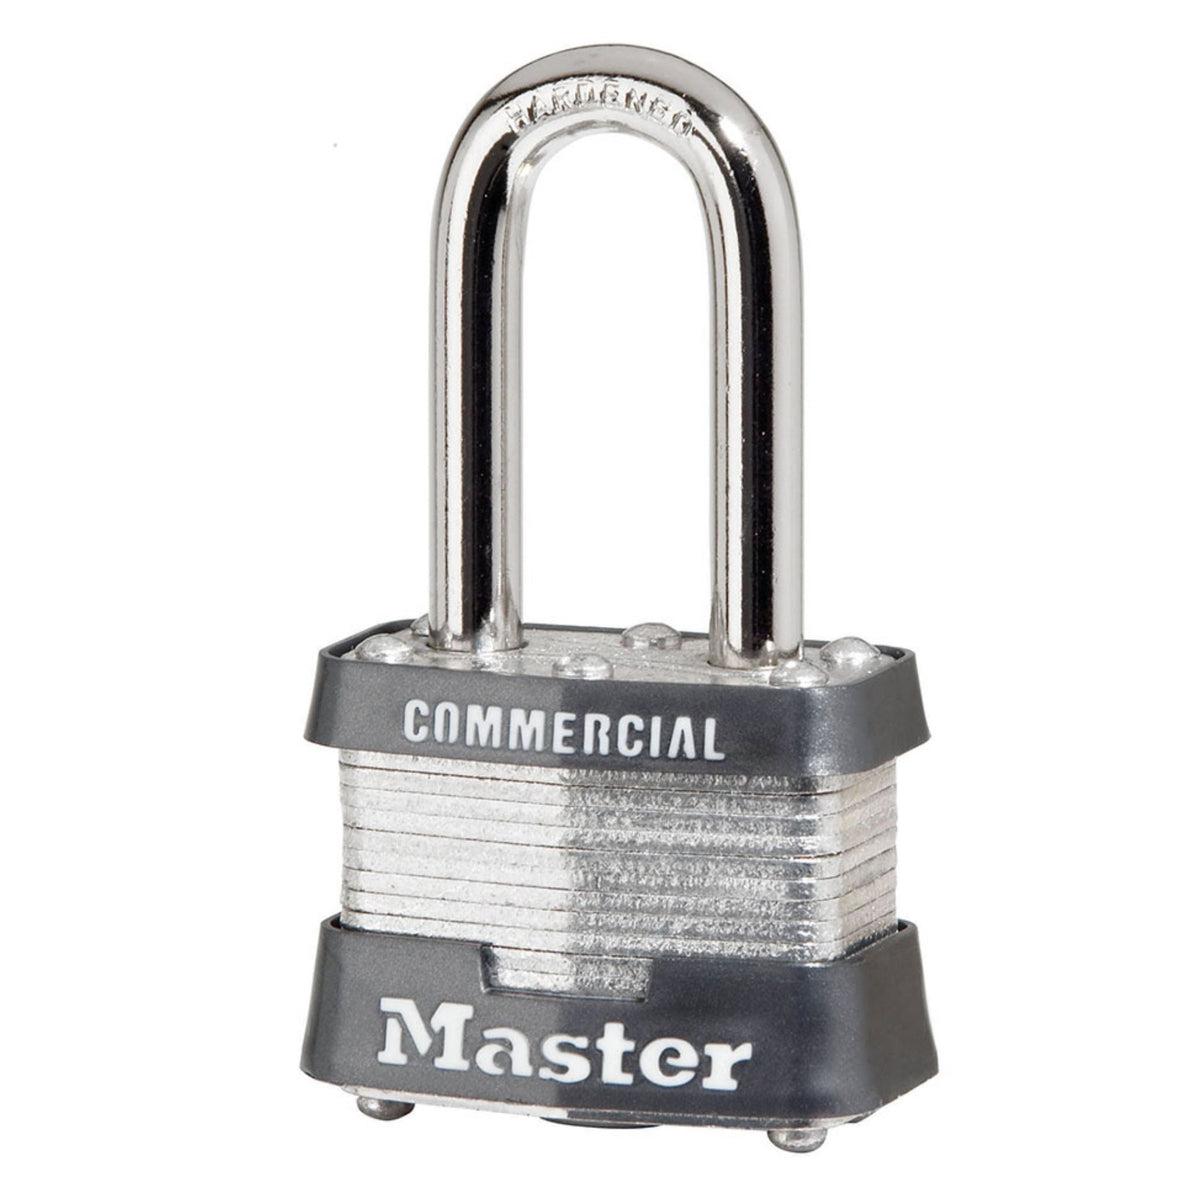 Master Lock 3KALF A383 Laminated Steel Locks Keyed Alike to Match Key Number KAA383 with 1.5-Inch Shackle - The Lock Source